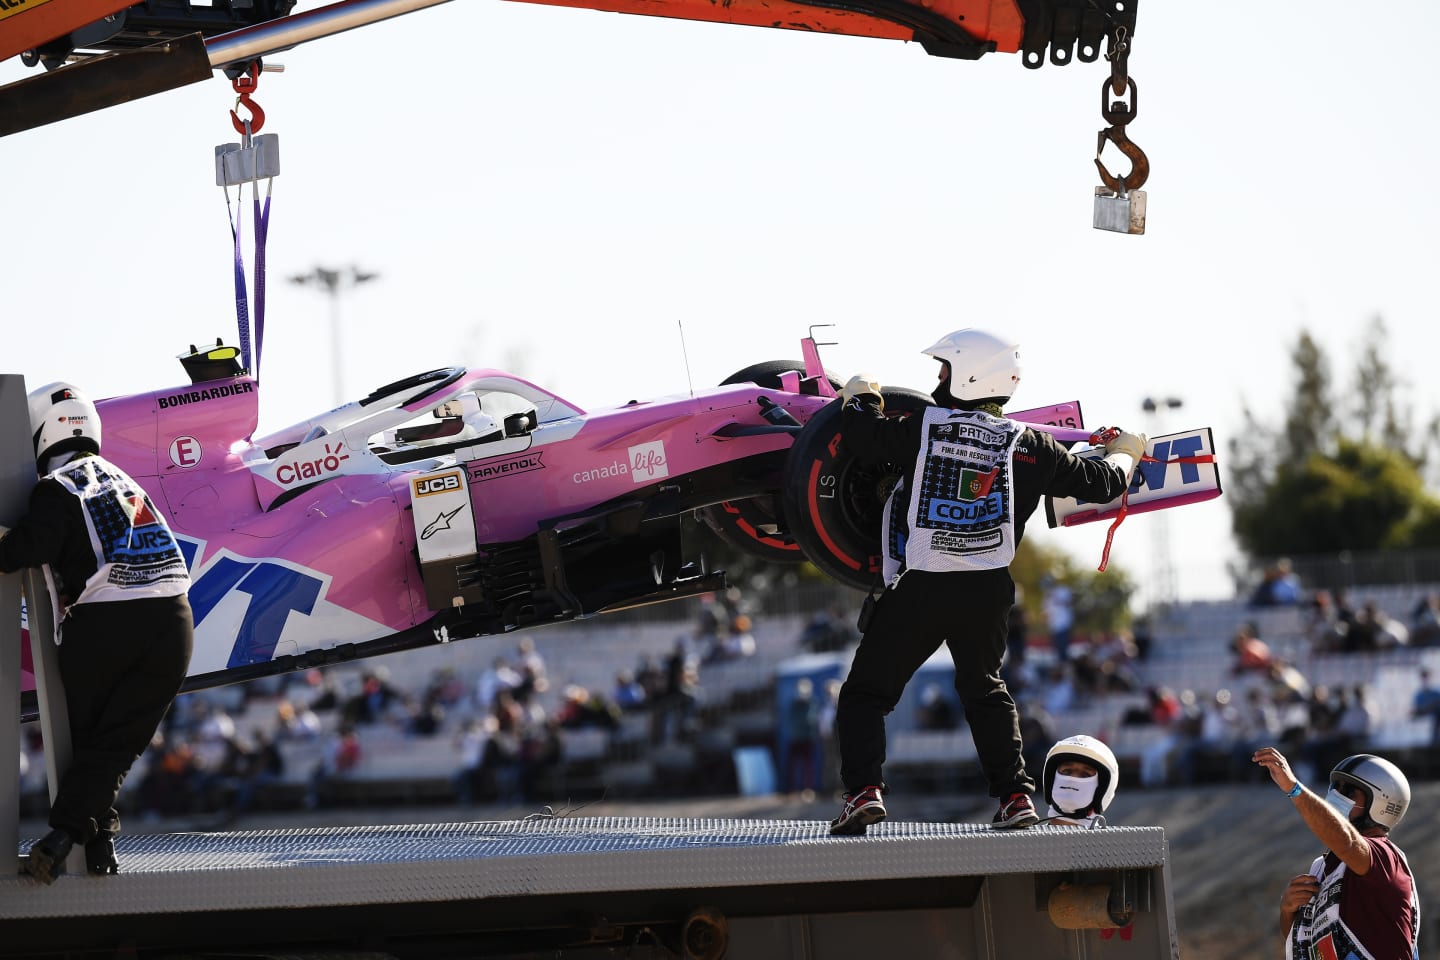 PORTIMAO, PORTUGAL - OCTOBER 23: The car of Lance Stroll of Canada and Racing Point is removed from the track after a crash during practice ahead of the F1 Grand Prix of Portugal at Autodromo Internacional do Algarve on October 23, 2020 in Portimao, Portugal. (Photo by Jorge Guerrero - Pool/Getty Images)